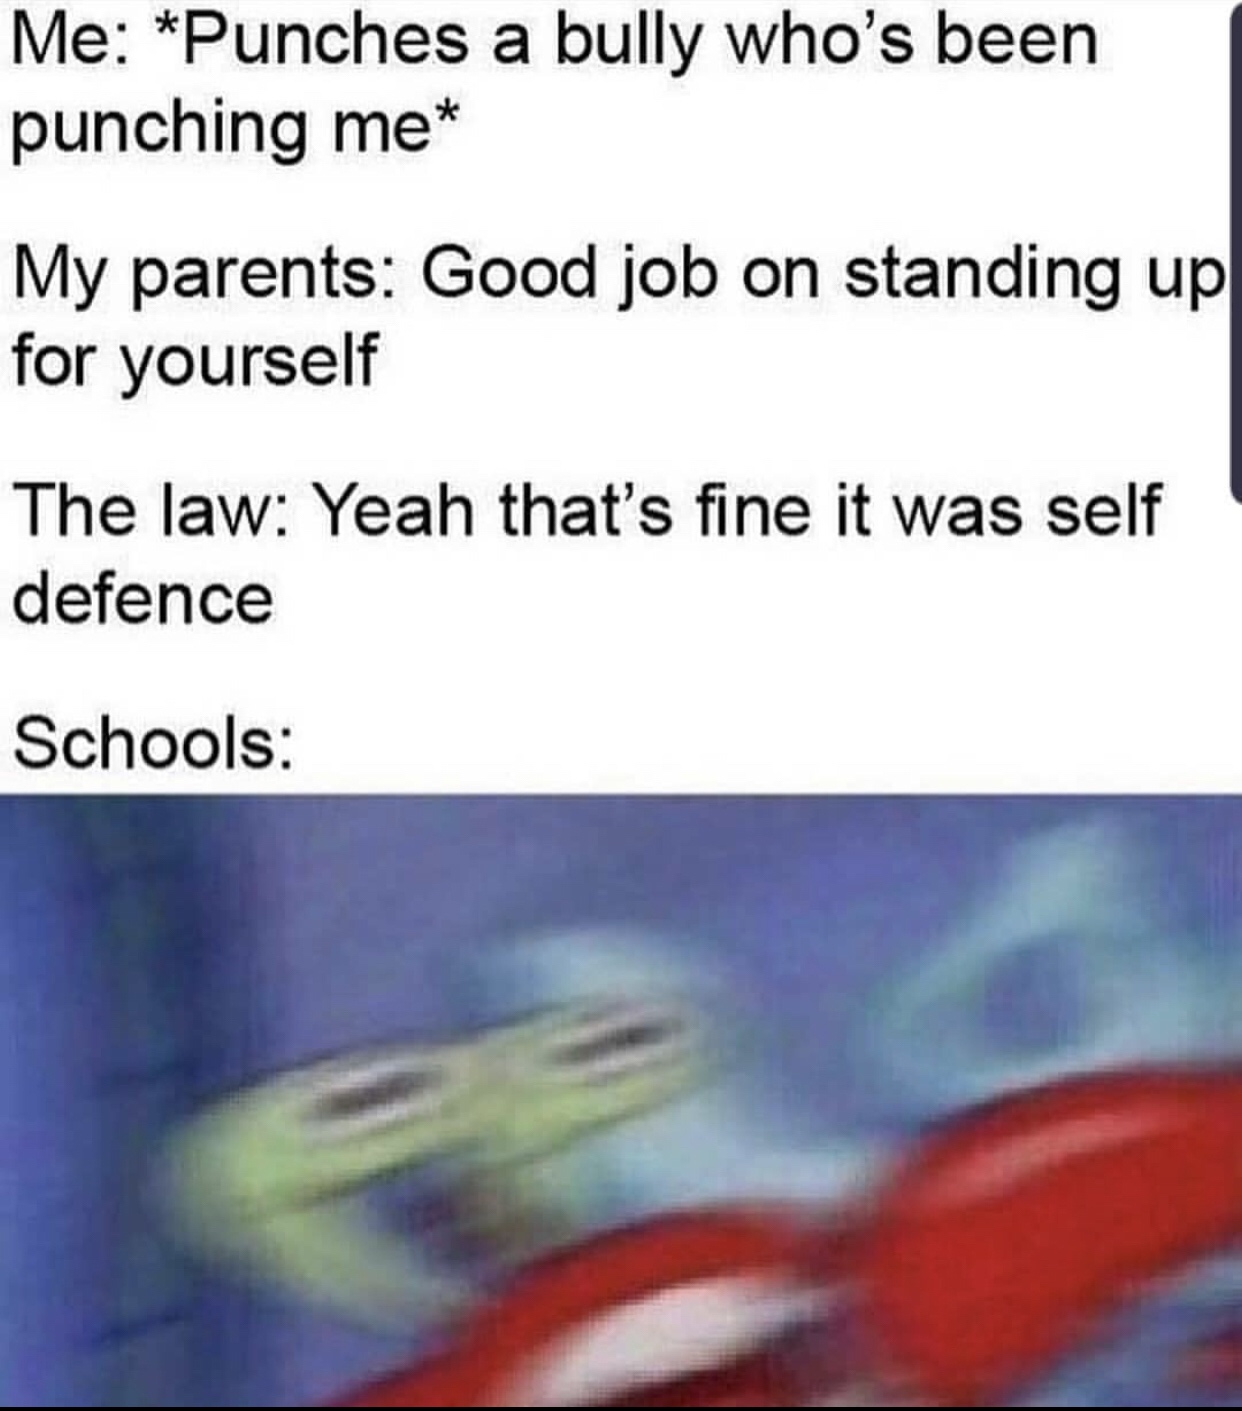 angry - Me Punches a bully who's been punching me My parents Good job on standing up for yourself The law Yeah that's fine it was self defence Schools